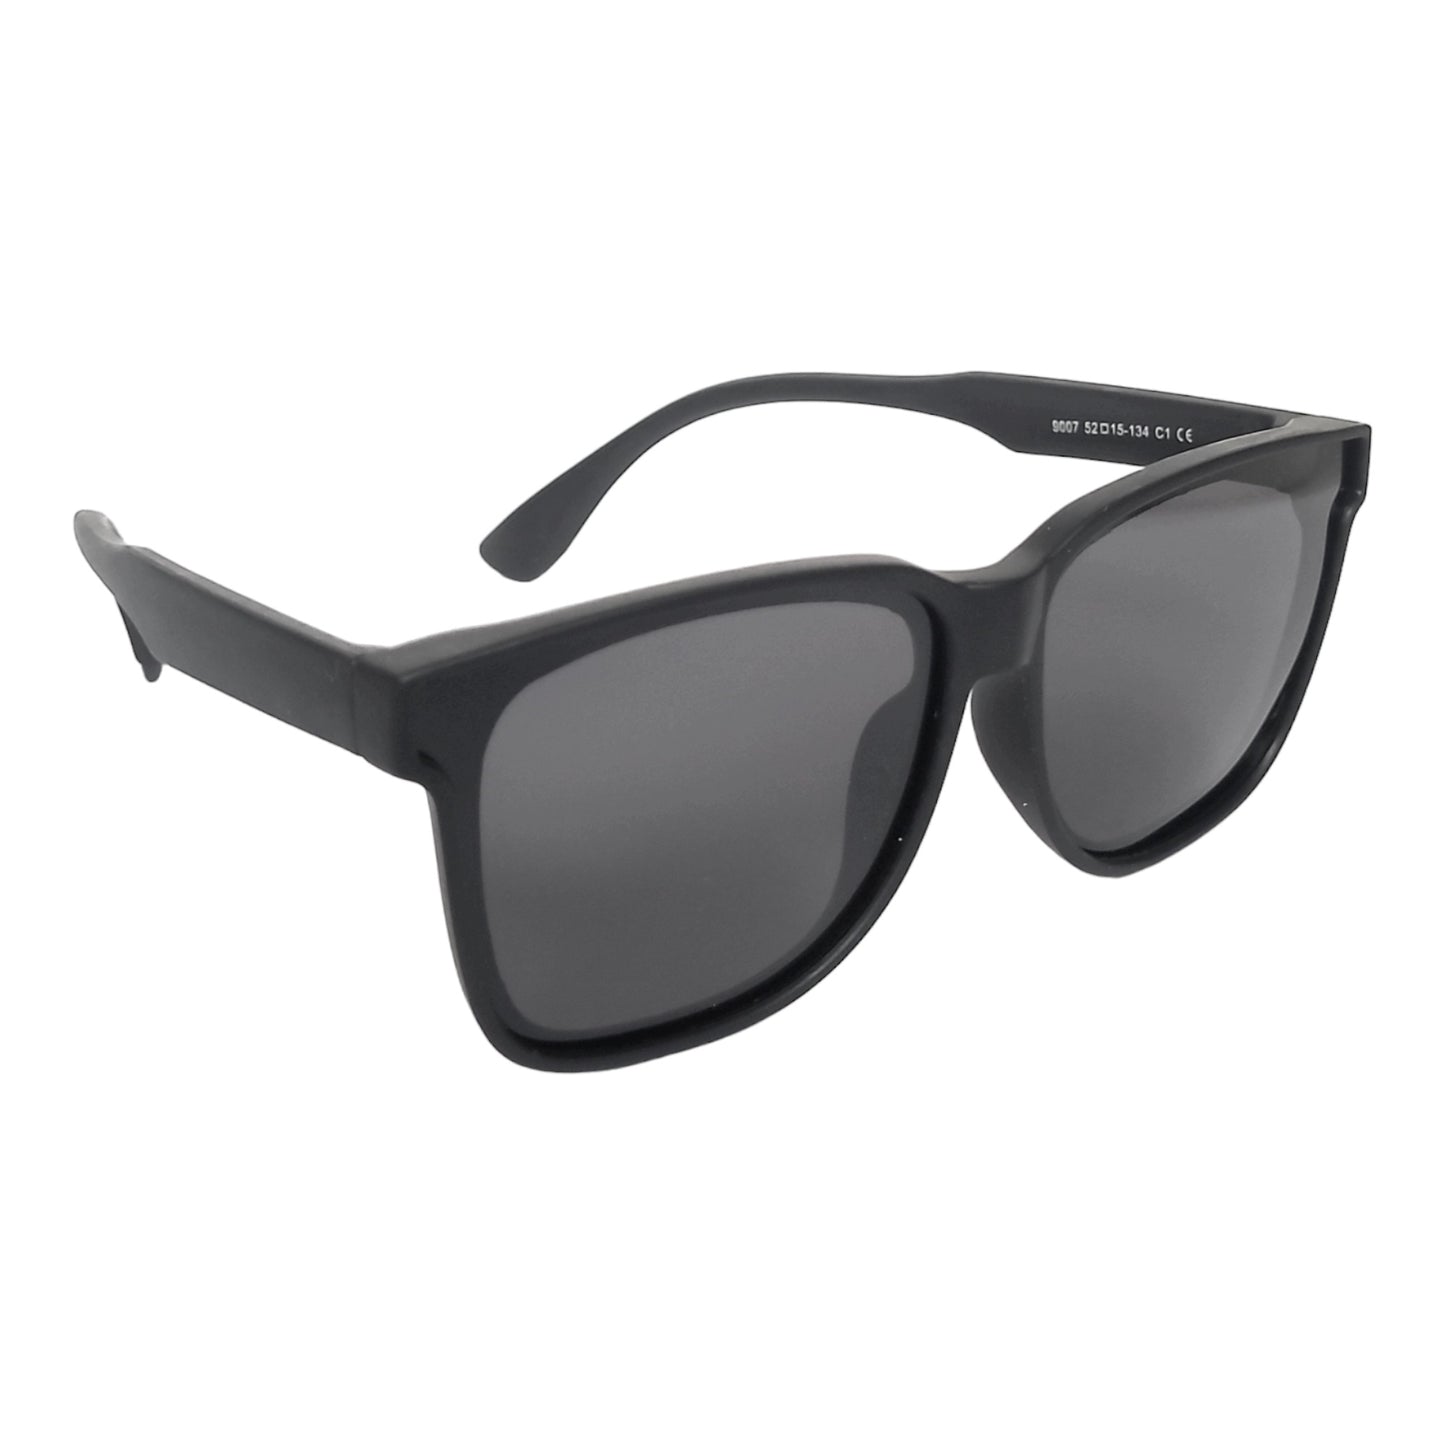 Kids Polarized Sunglasses for Children Age 4-9 Years Old, Girl or Boy  | affaires-9007- Black